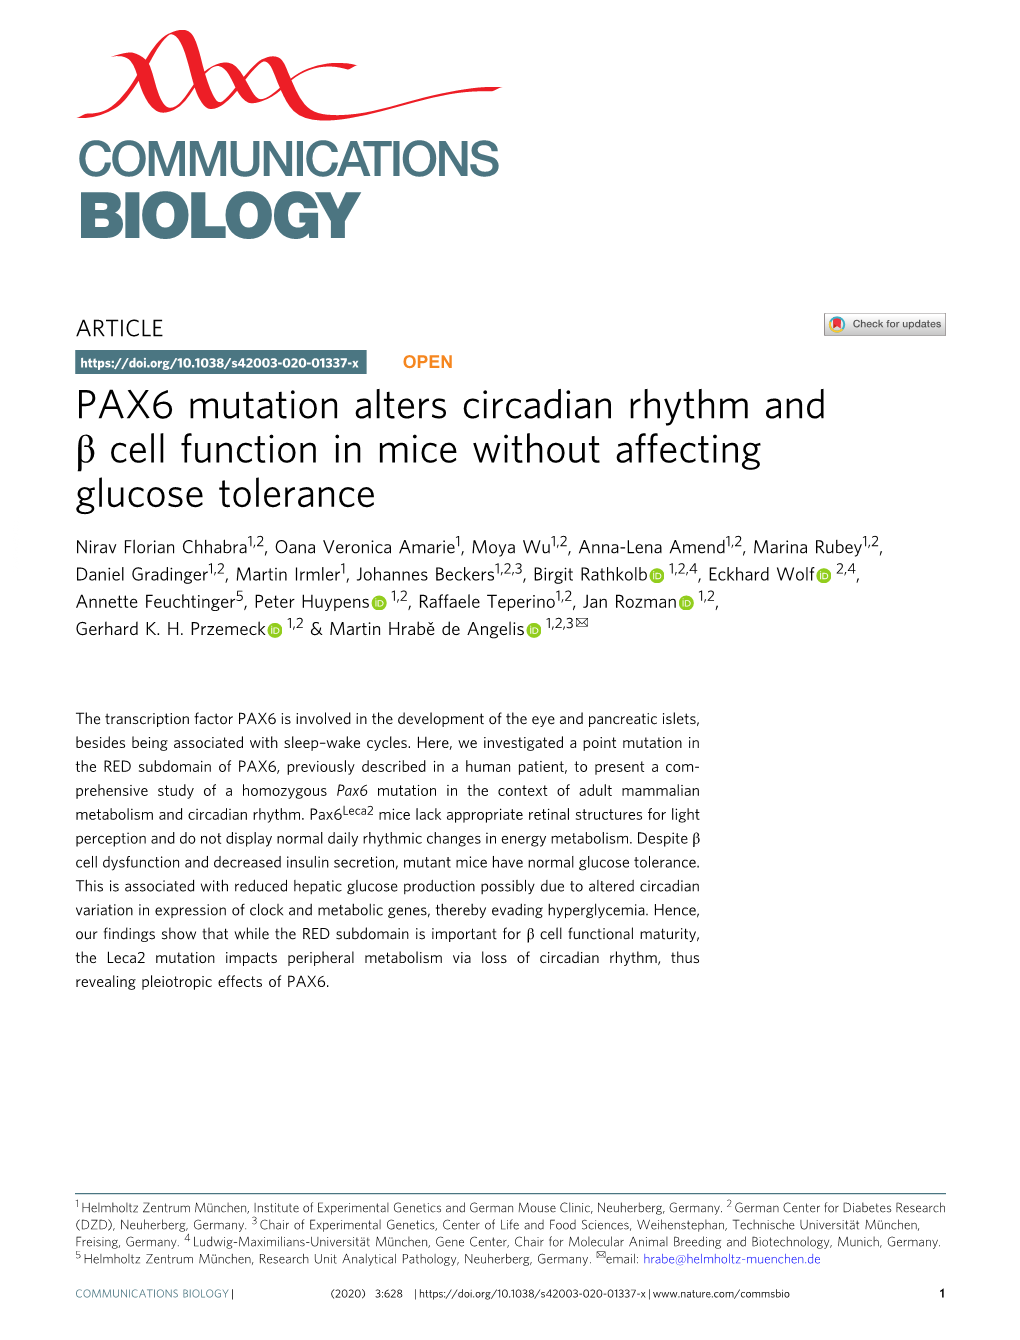 PAX6 Mutation Alters Circadian Rhythm and Î² Cell Function in Mice Without